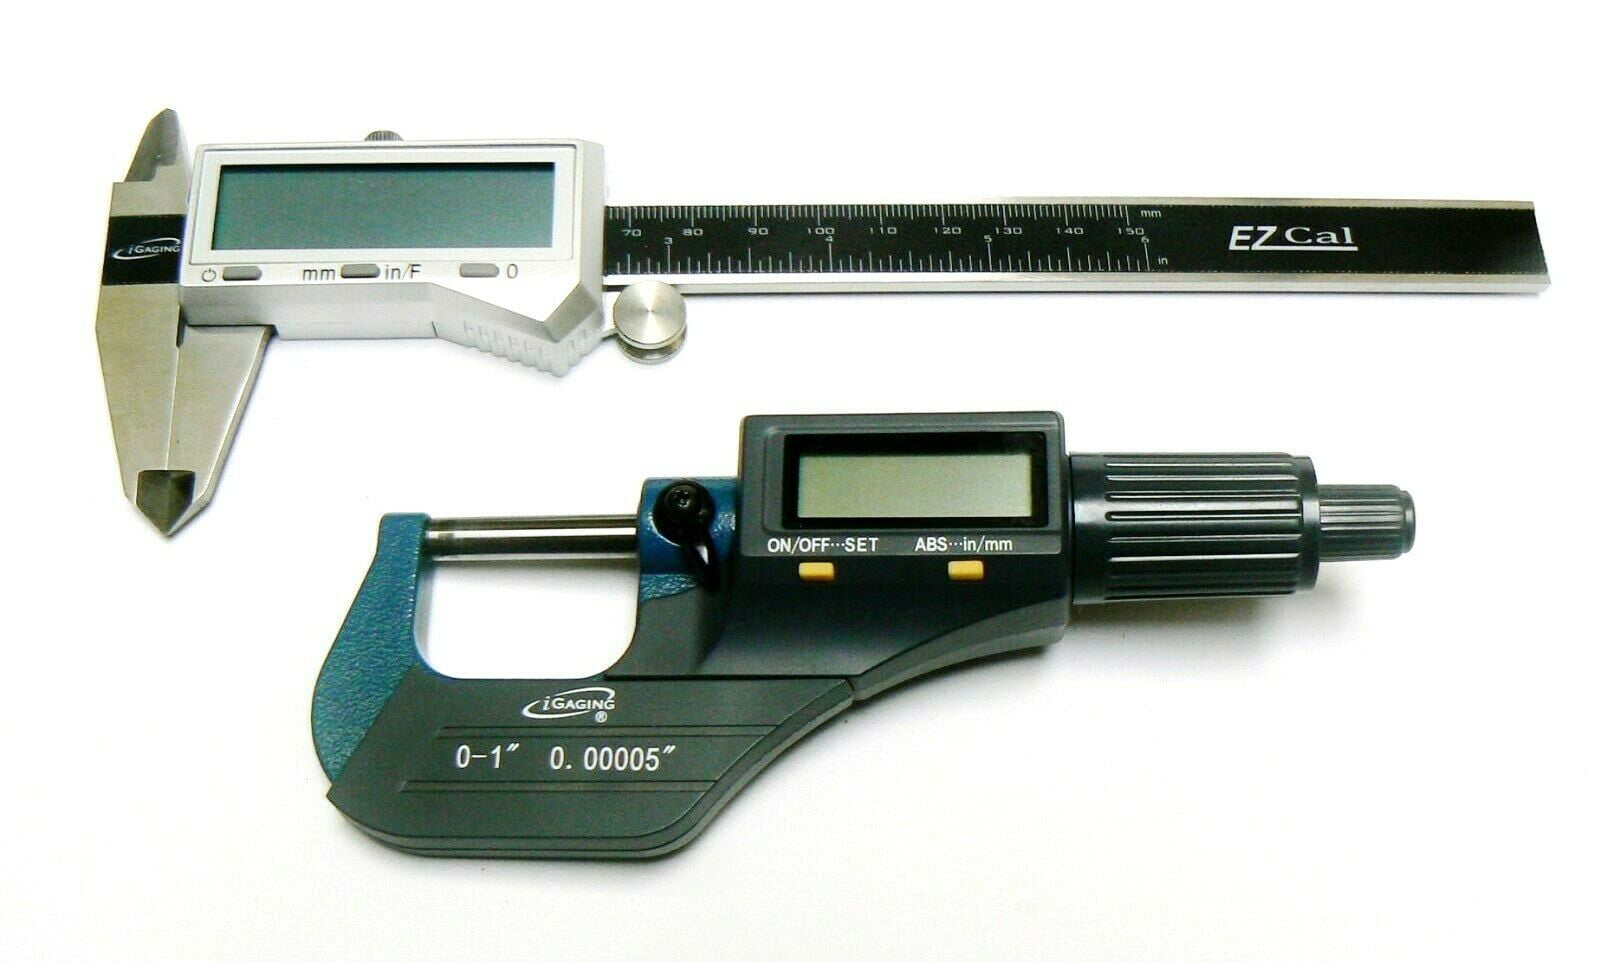 iGAGING MICROMETER DIGITAL ELECTRONIC OUTSIDE 0-1" & METRIC X-LARGE LCD CARBIDE 